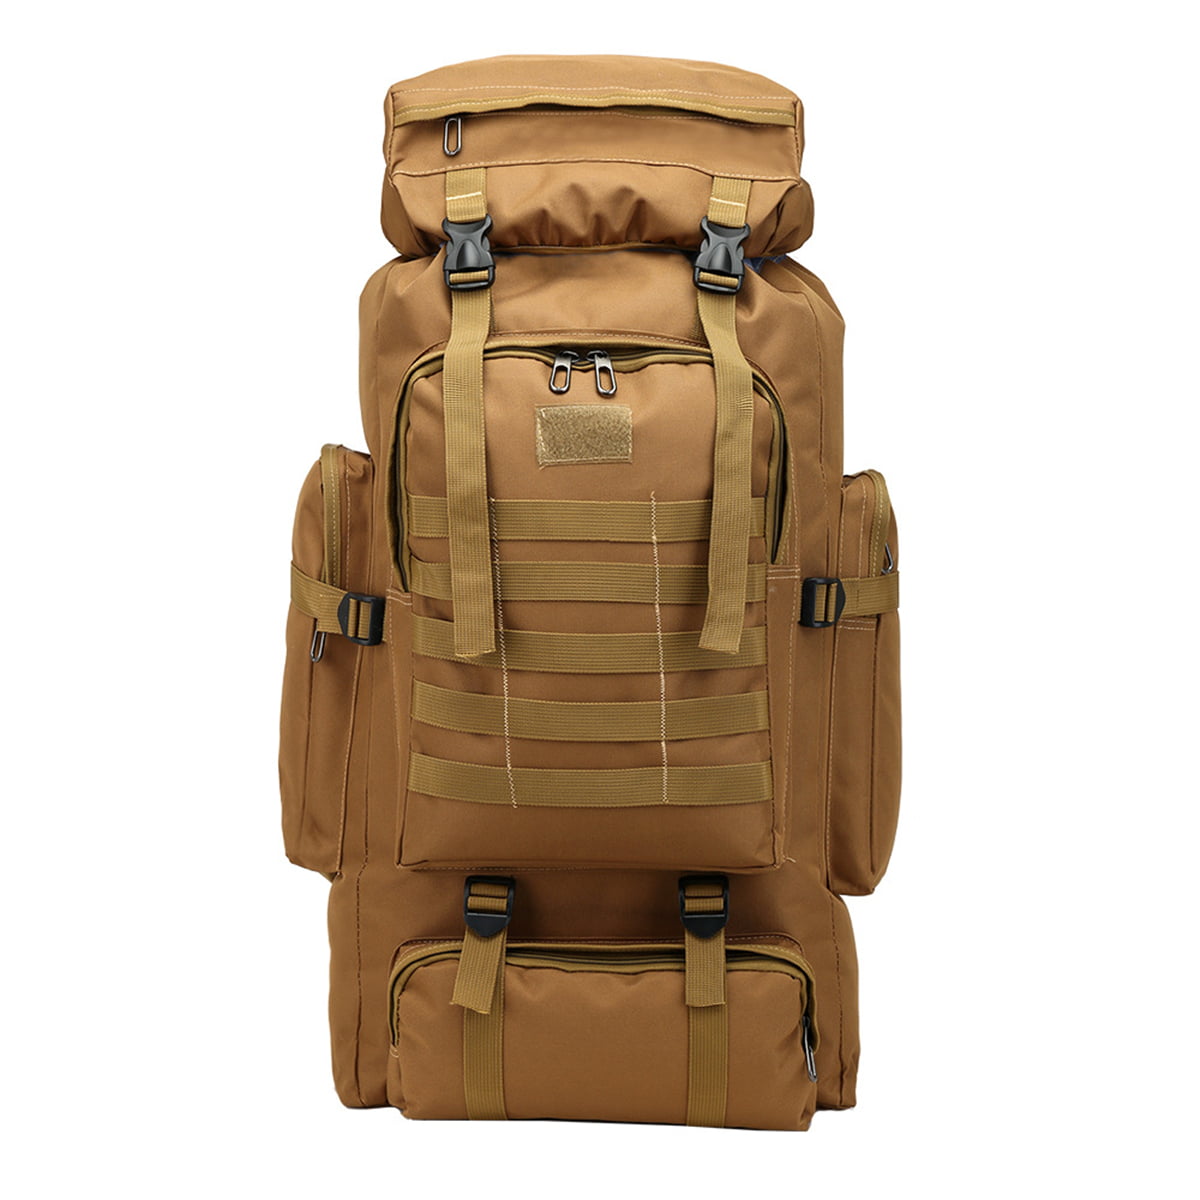 80L Outdoor Camouflage Backpack Military Army Rucksack Tactical Hiking Bag Large